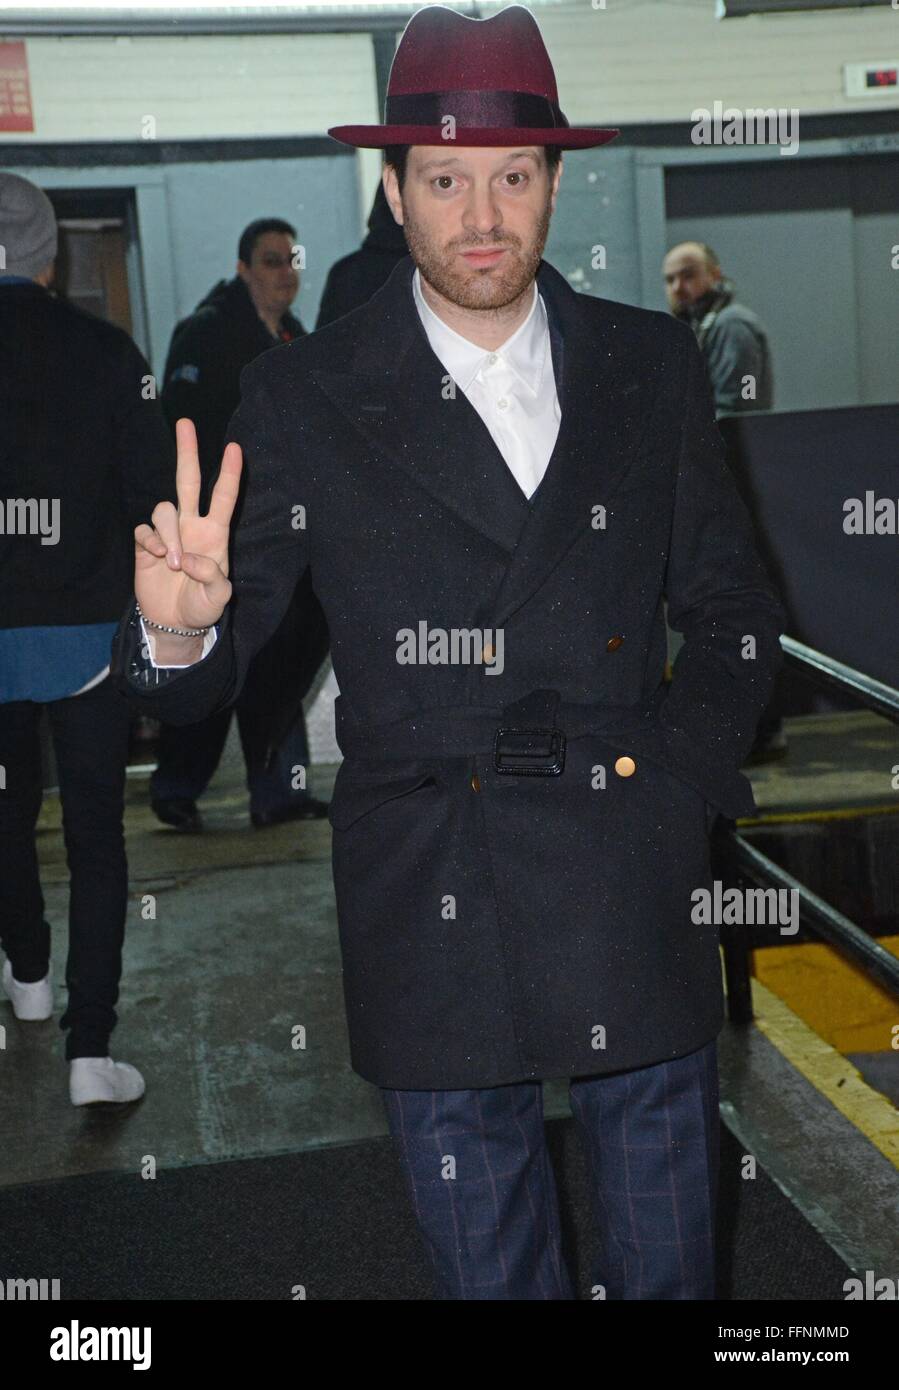 New York, NY, USA. 16th Feb, 2016. Mayer Hawthorne out and about for Celebrity Candids - TUE, New York, NY February 16, 2016. © Derek Storm/Everett Collection/Alamy Live News Stock Photo